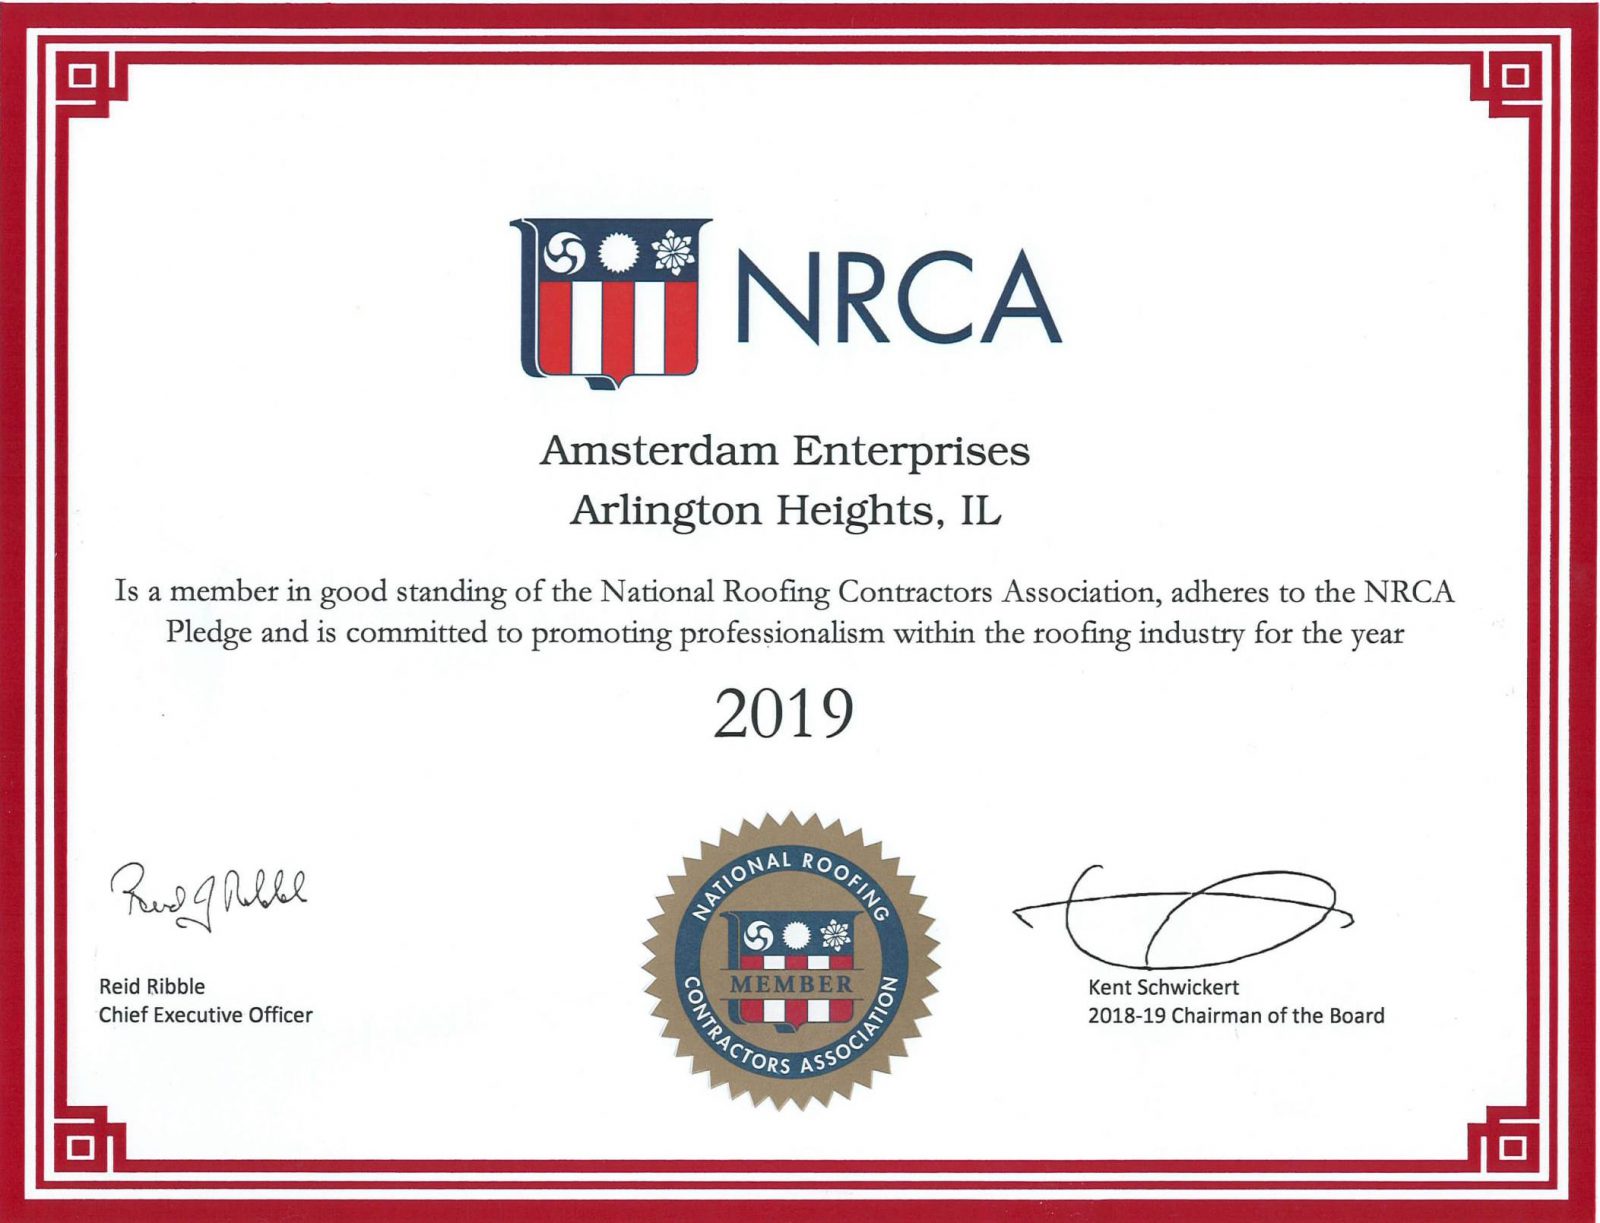 NRCA National Roofing Contractors Association Certificate